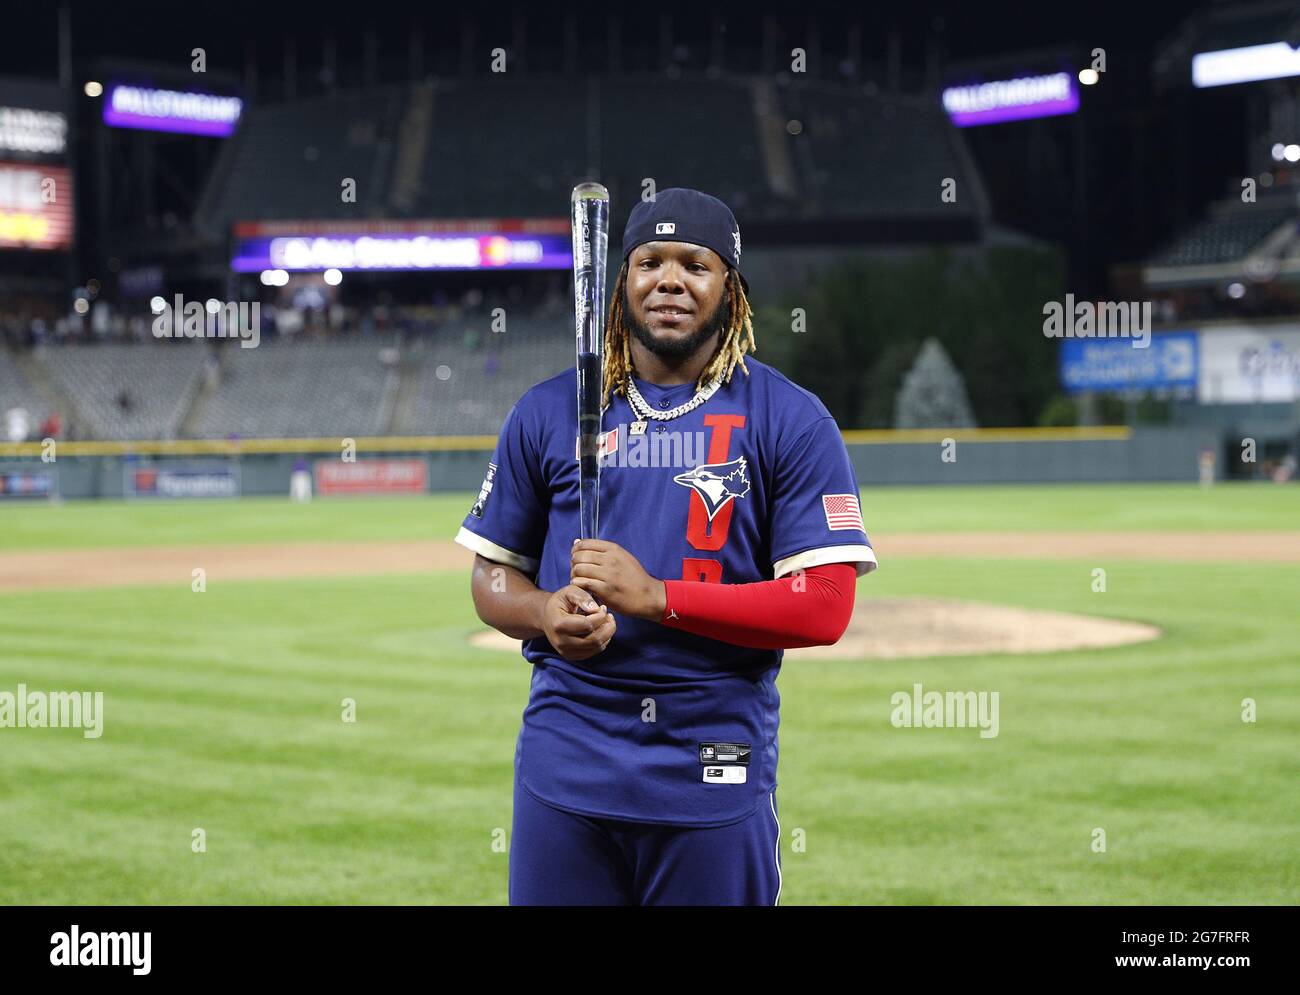 Denver, United States. 13th July, 2021. Toronto Blue Jays first baseman Vladimir Guerrero Jr. holds the trophy after being named the MVP of the 2021 MLB All-Star Game at Coors Field in Denver, Colorado, on Tuesday, July 13, 2021. Photo by Bob Strong/UPI Credit: UPI/Alamy Live News Stock Photo